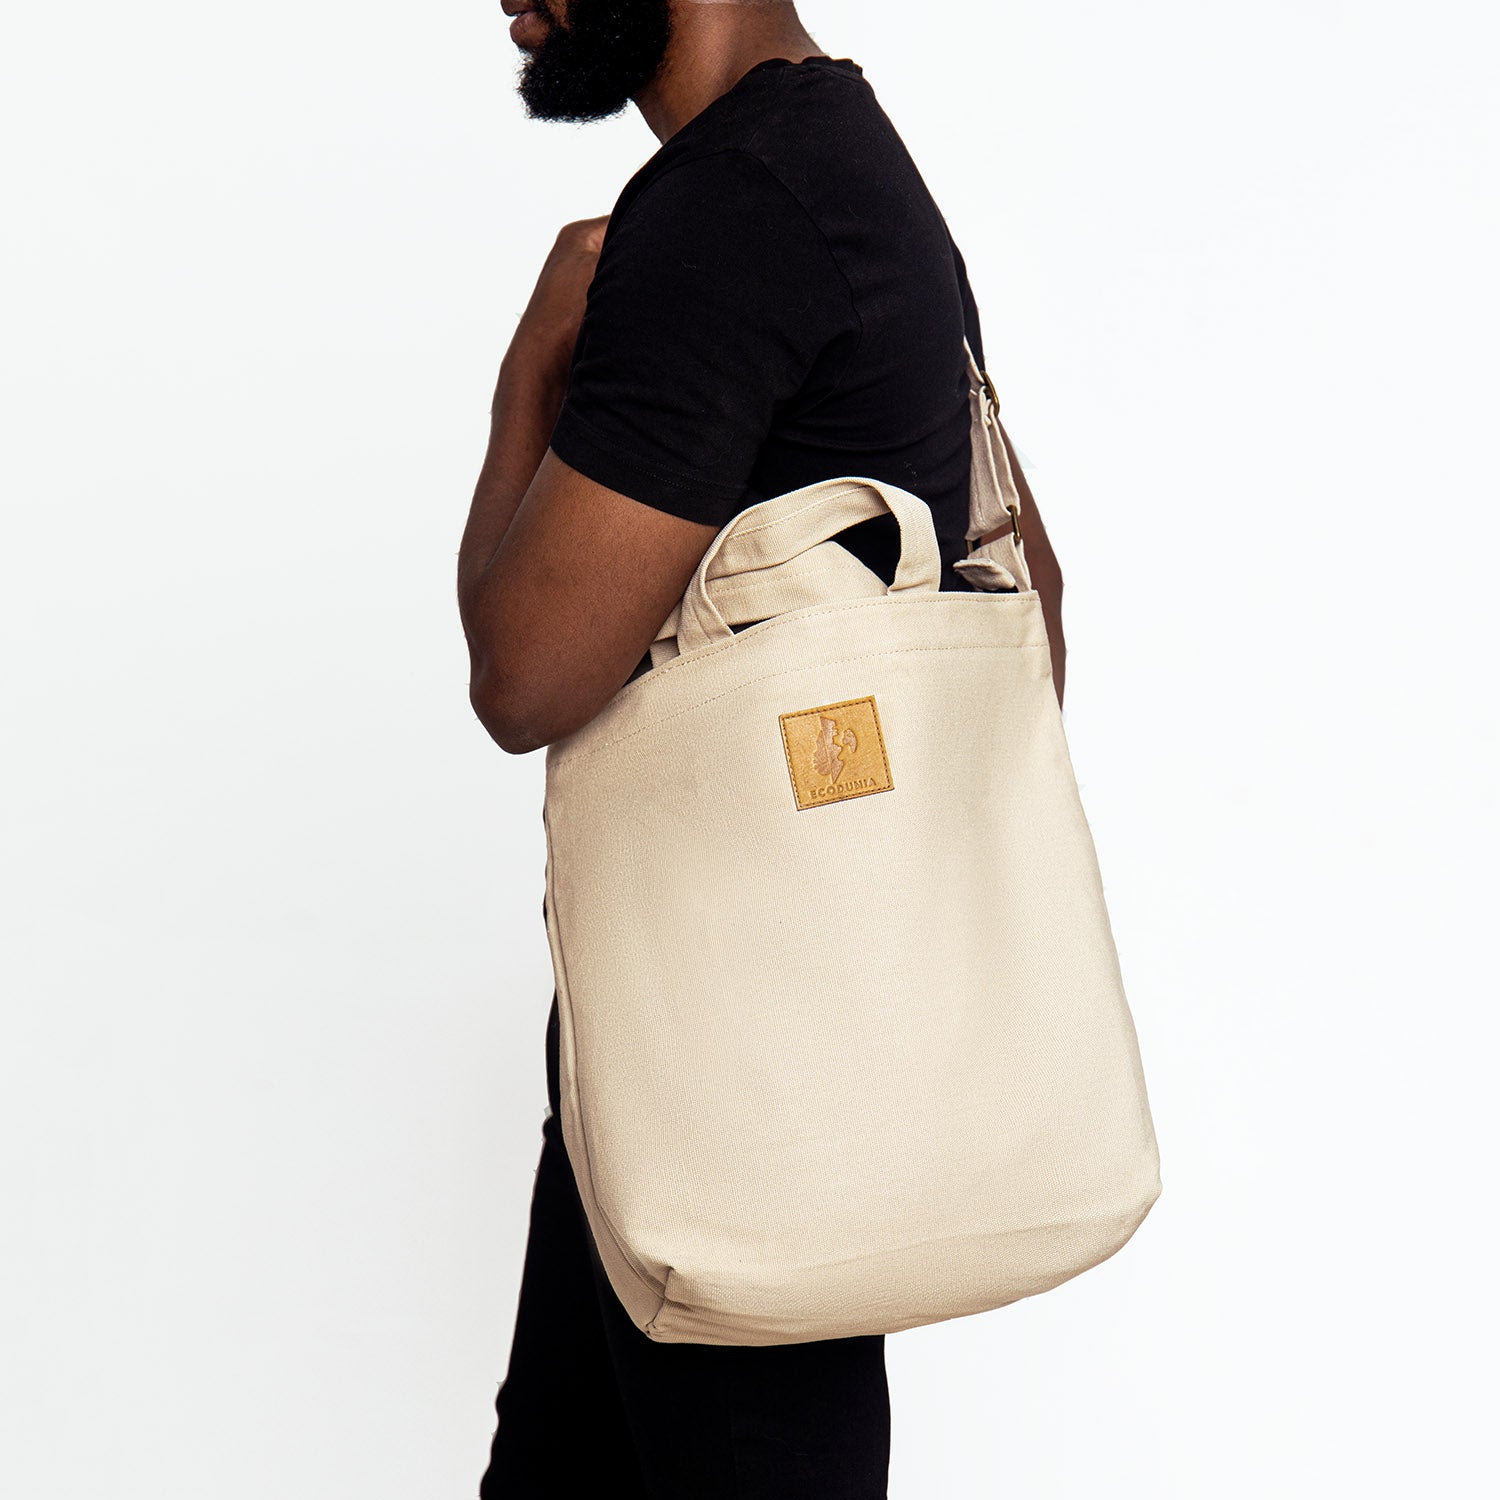 The Amani Carry All Bag - Sand White